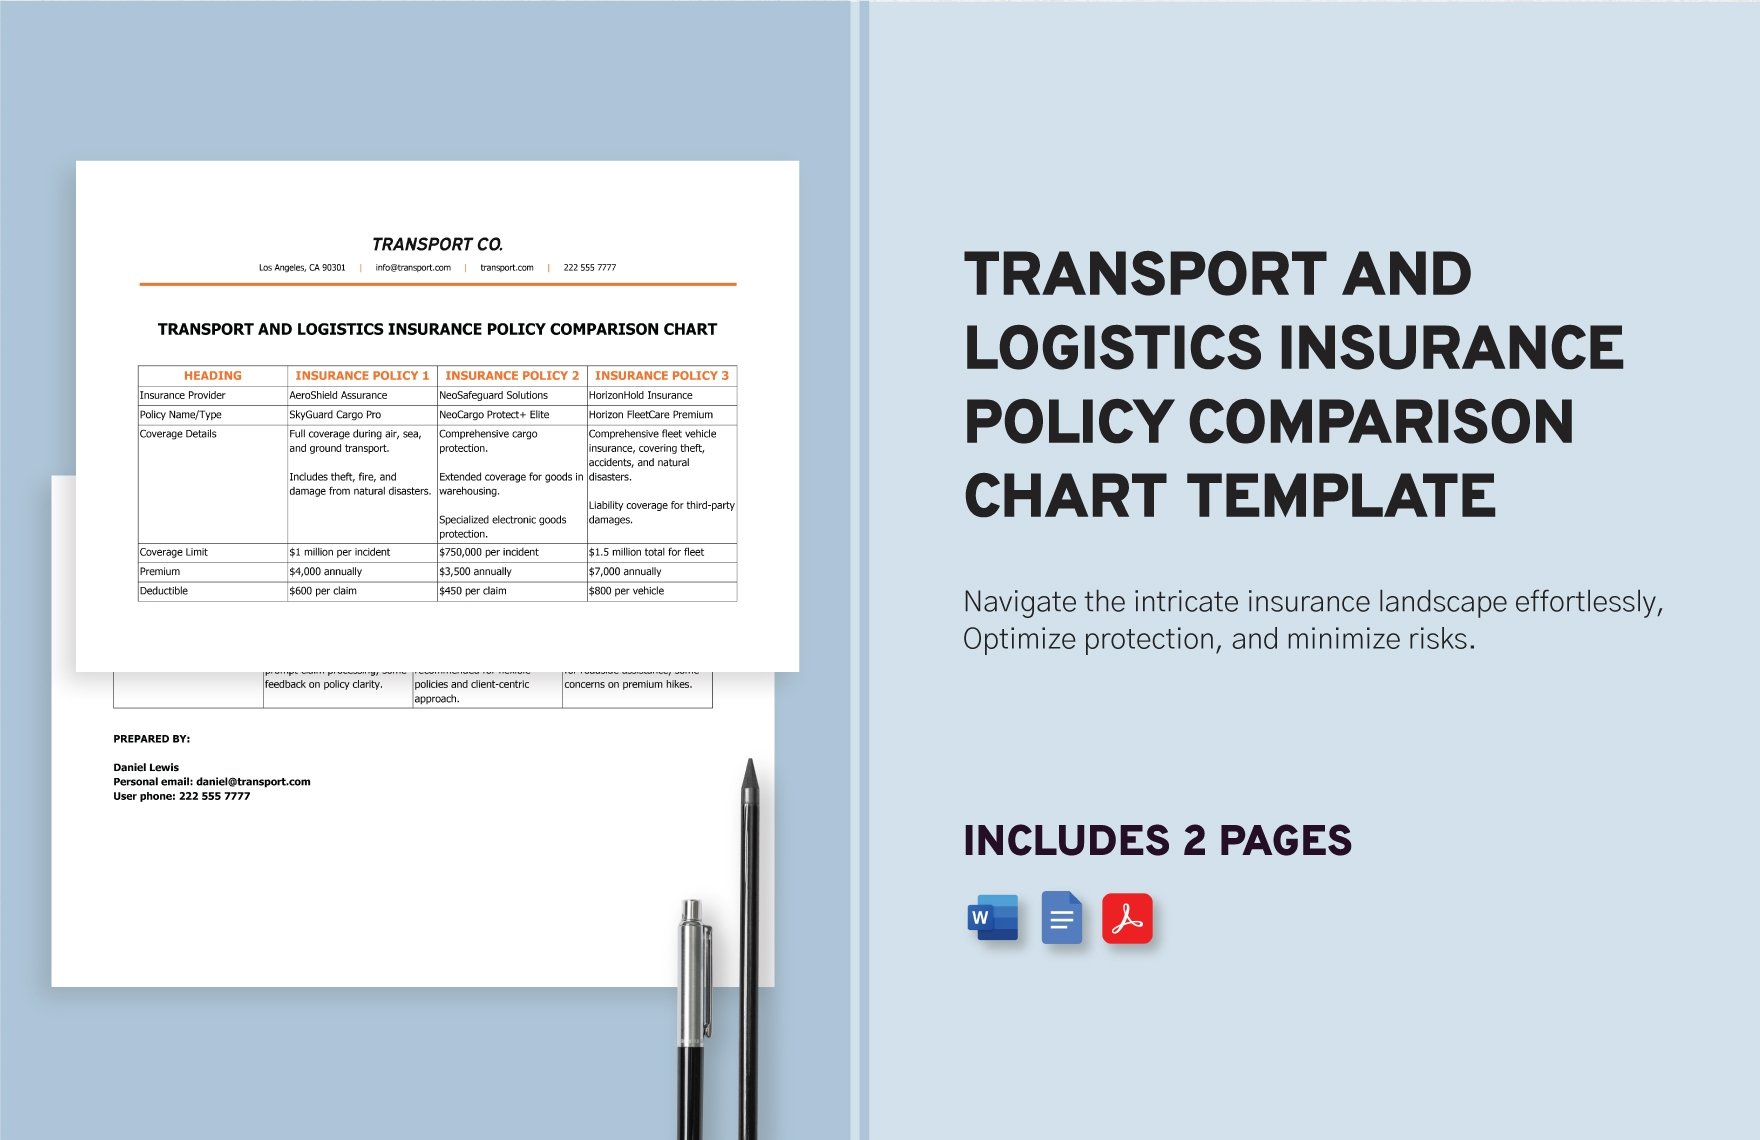 Transport and Logistics Insurance Policy Comparison Chart Template